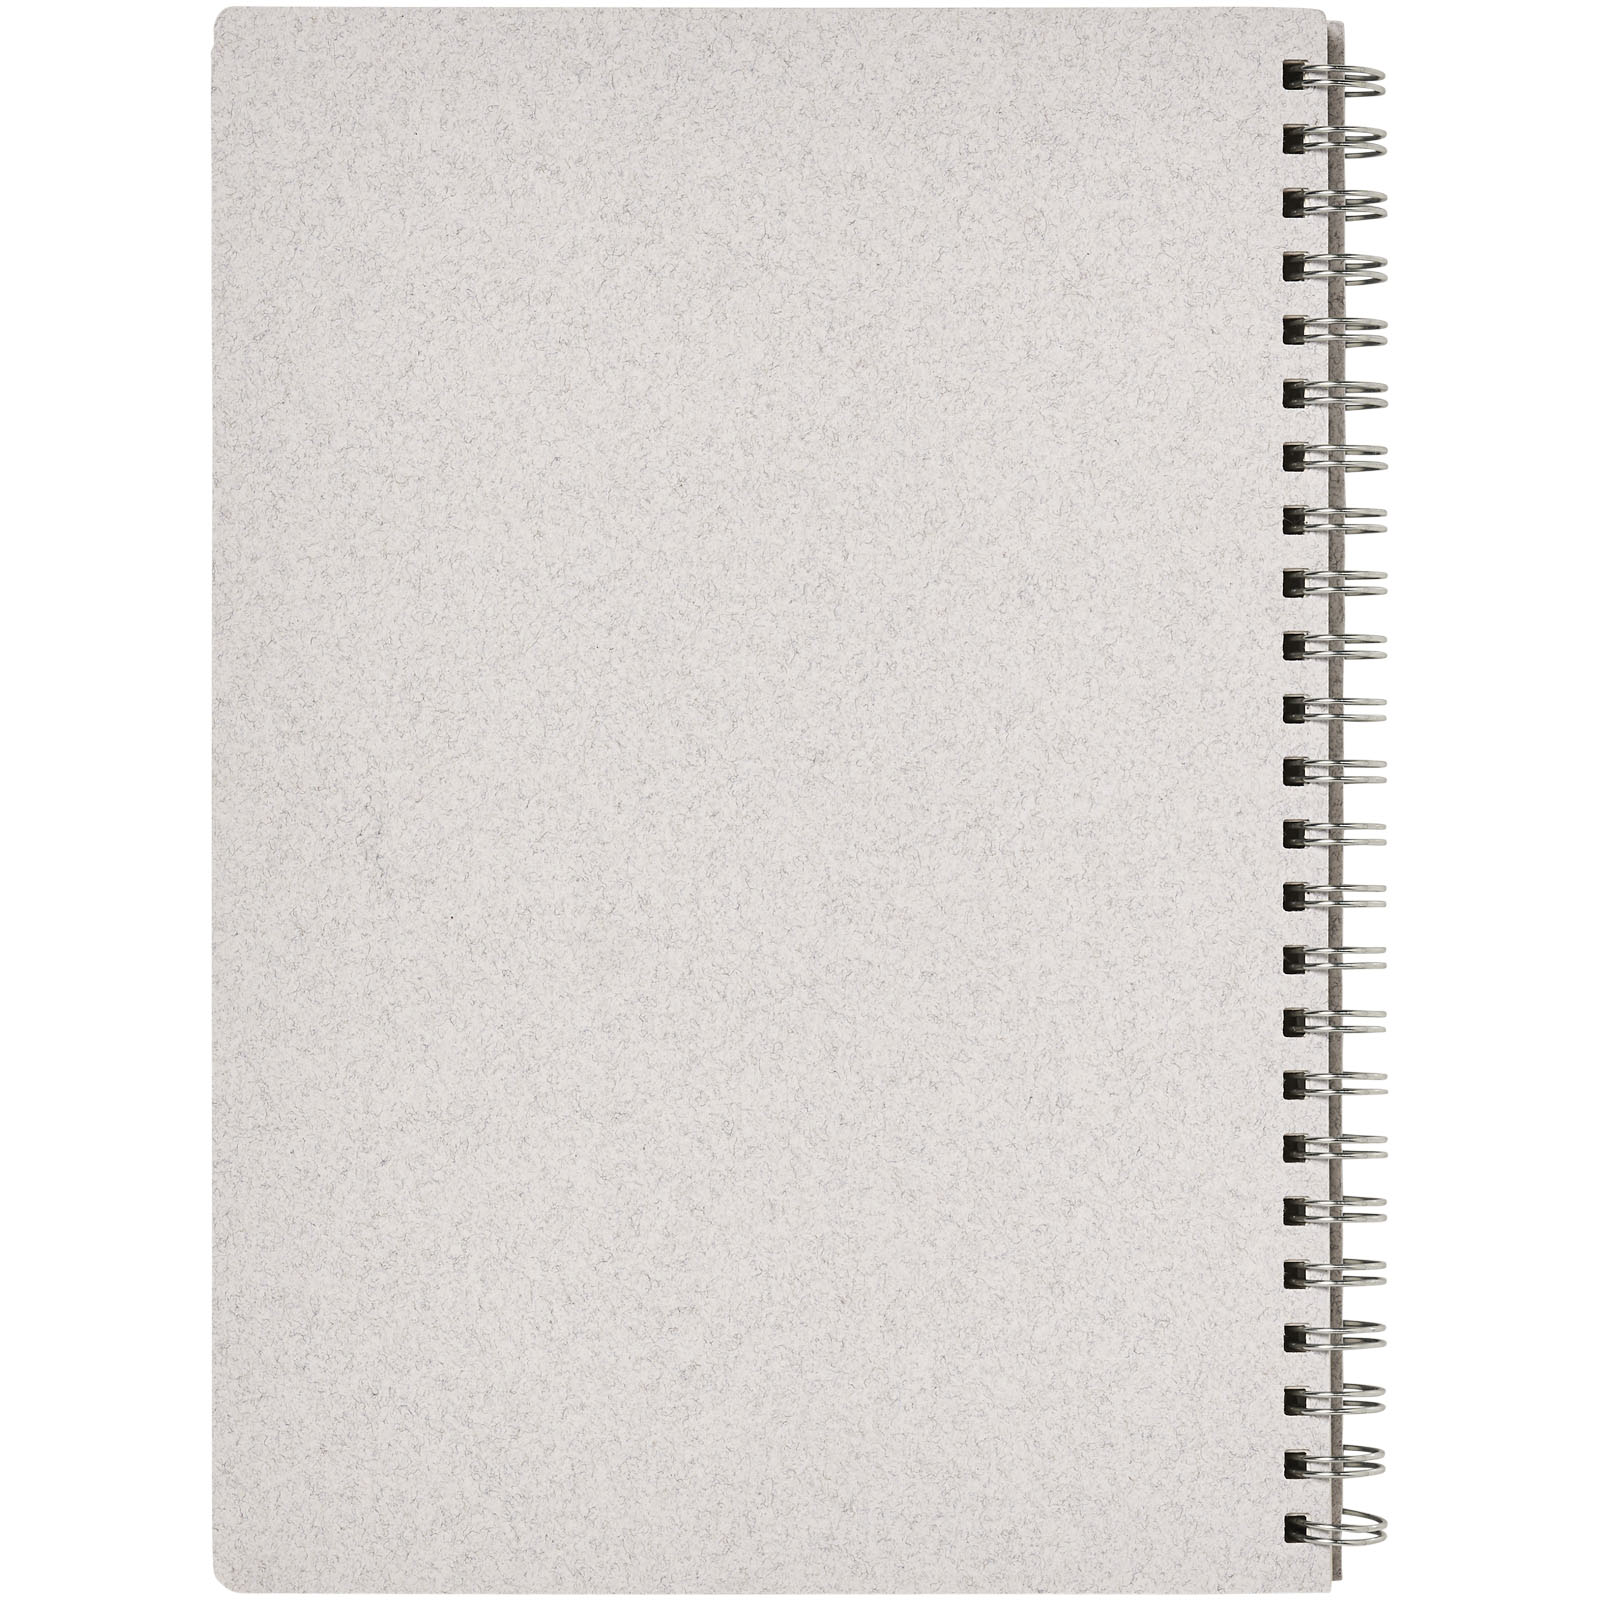 Advertising Notebooks - Bianco A5 size wire-o notebook - 2